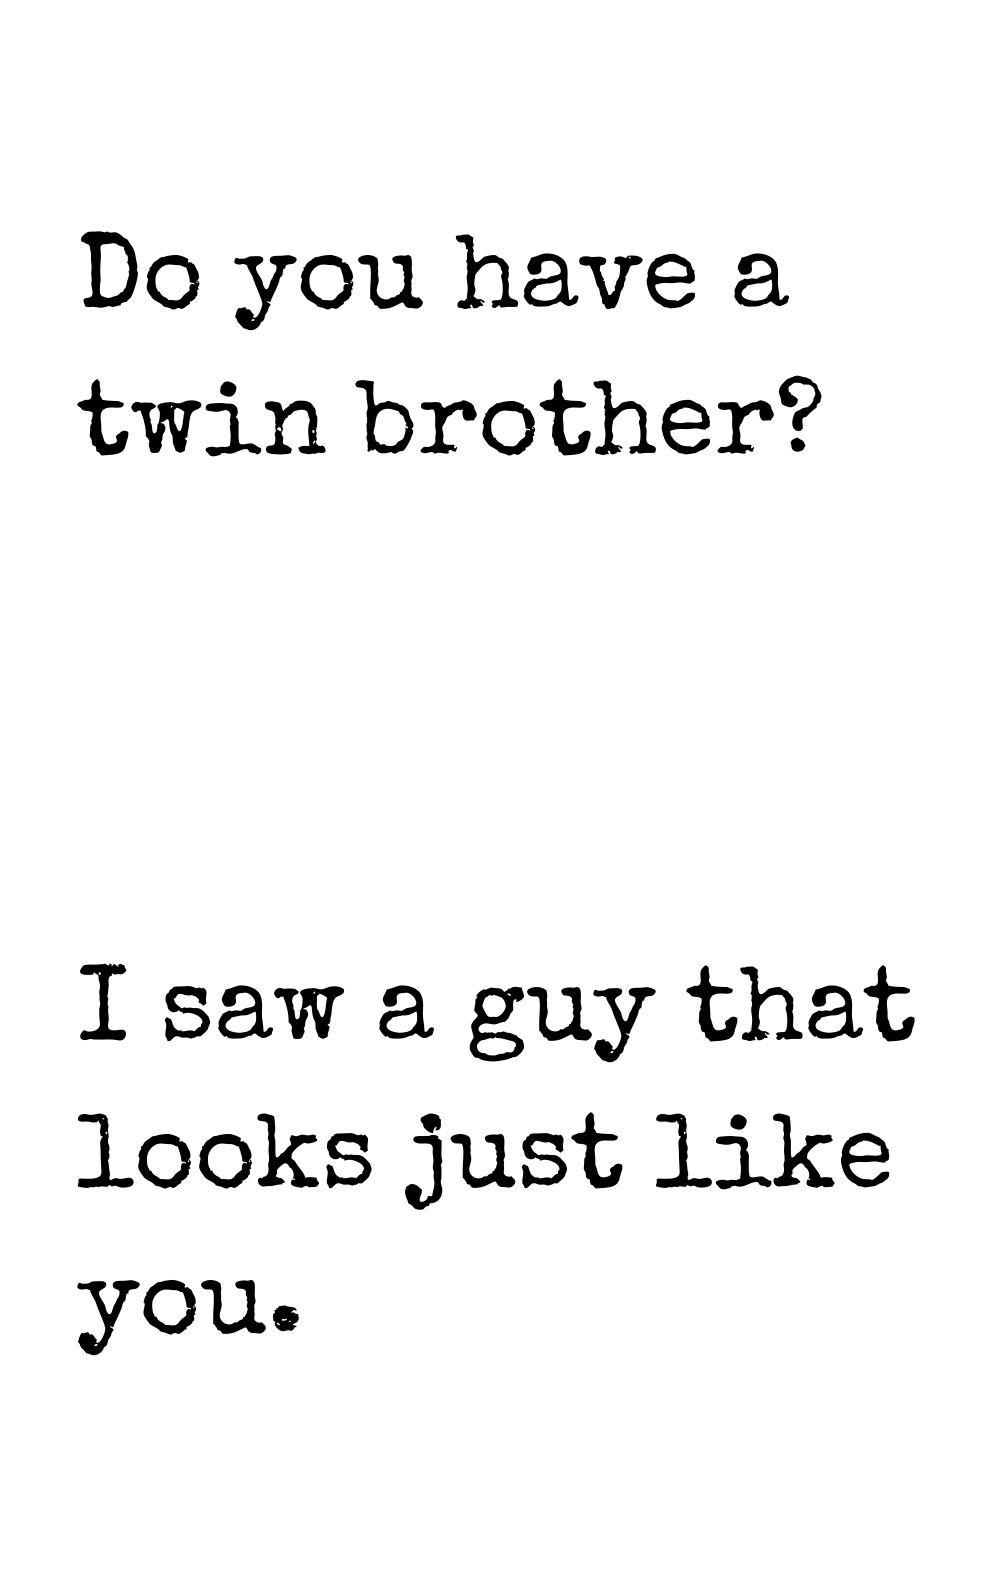 do you have a twin brother